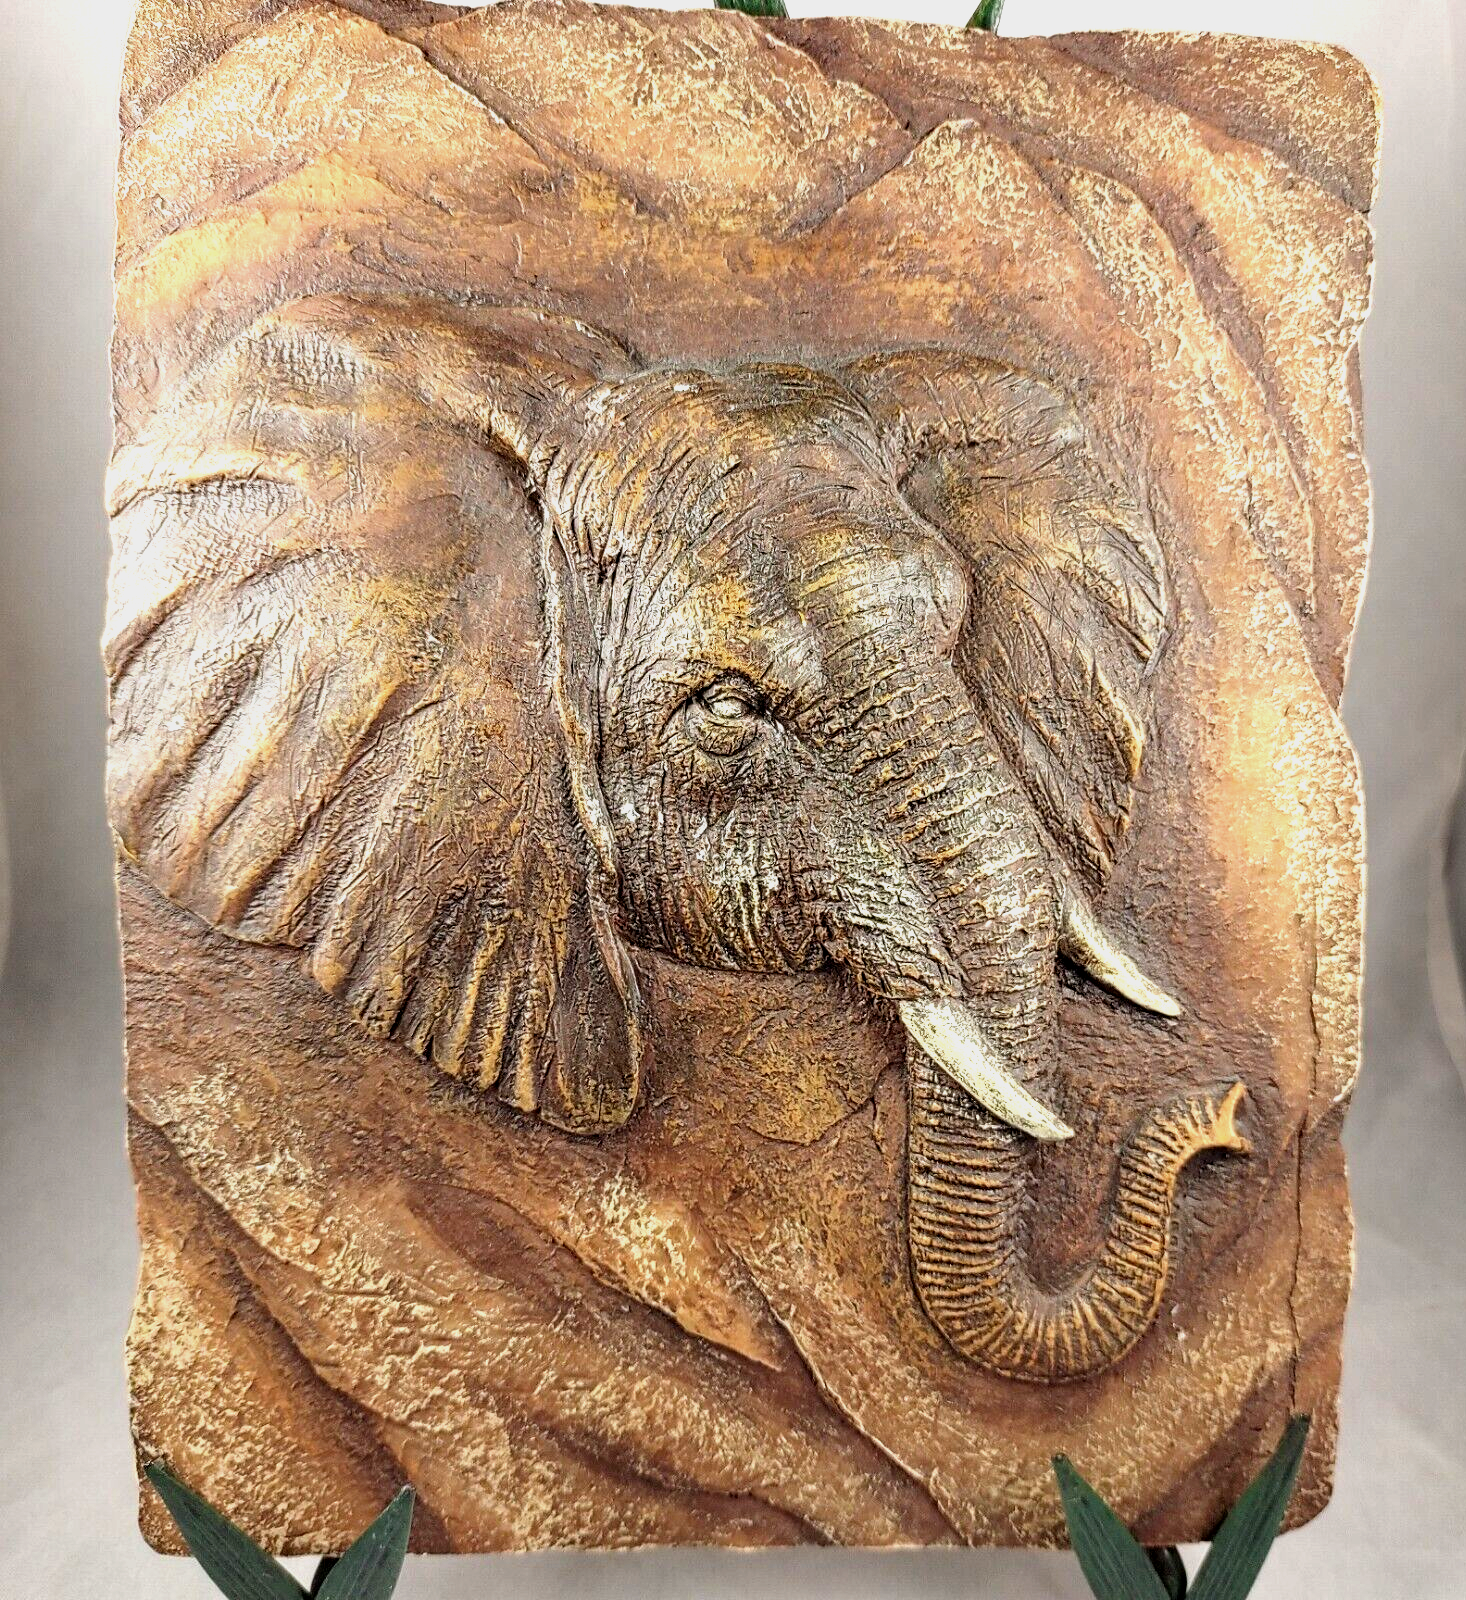 Primary image for Elephant Head Carved Ceramic Tile with Metal Leaf Stand Brown 10 x 8 Inches